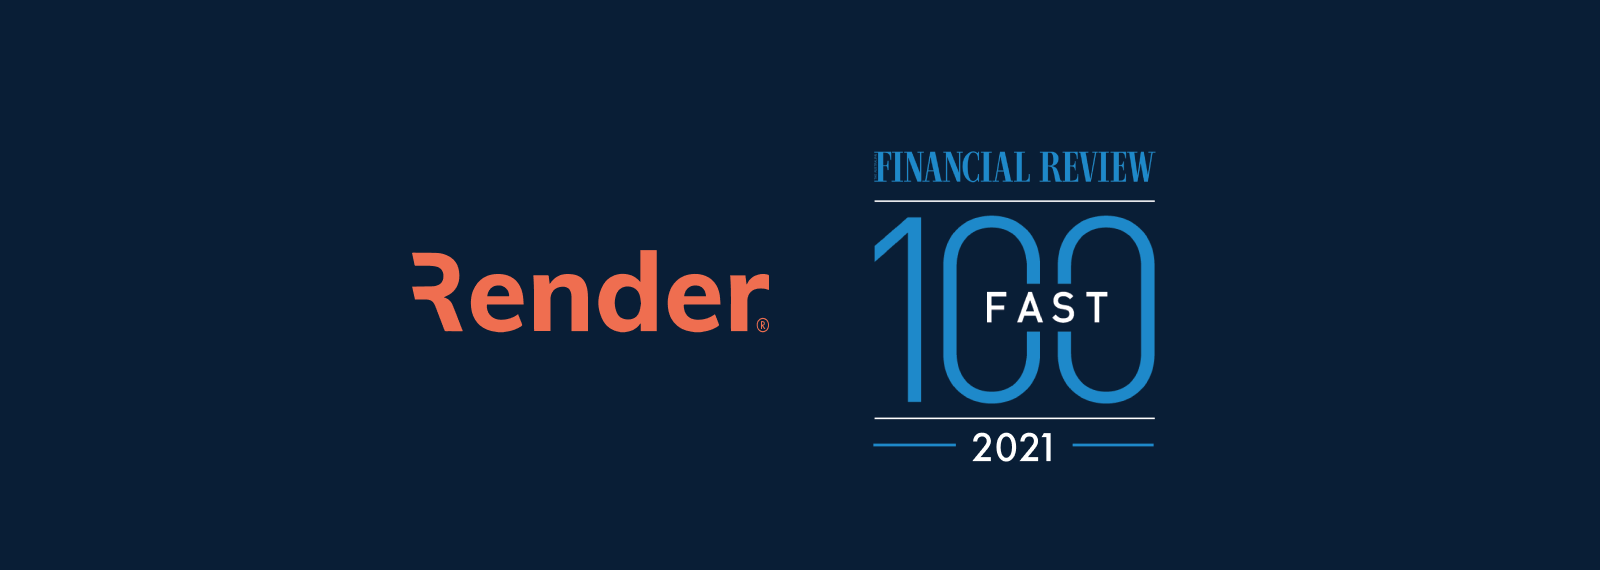 Render ranks 26th in 2021 AFR Fast 100 companies